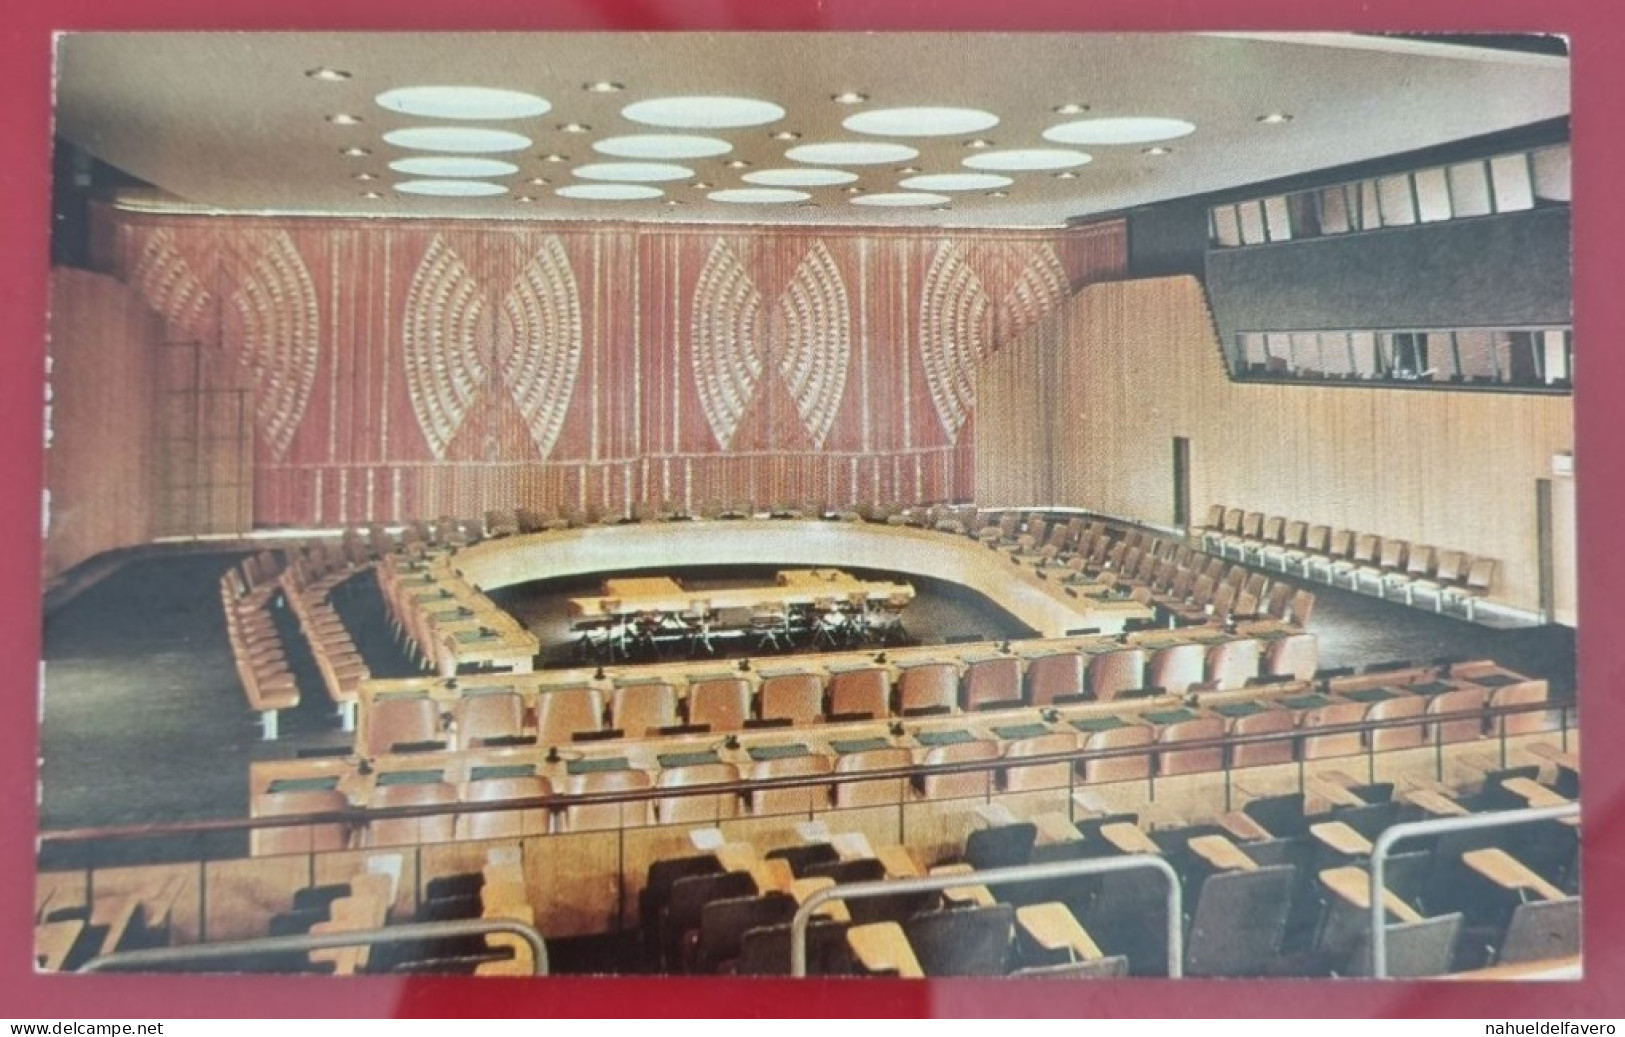 Uncirculated Postcard - USA - NY, NEW YORK CITY - UNITED NATIONS, ECONOMIC AND SOCIAL COUNCIL CHAMBER - Orte & Plätze